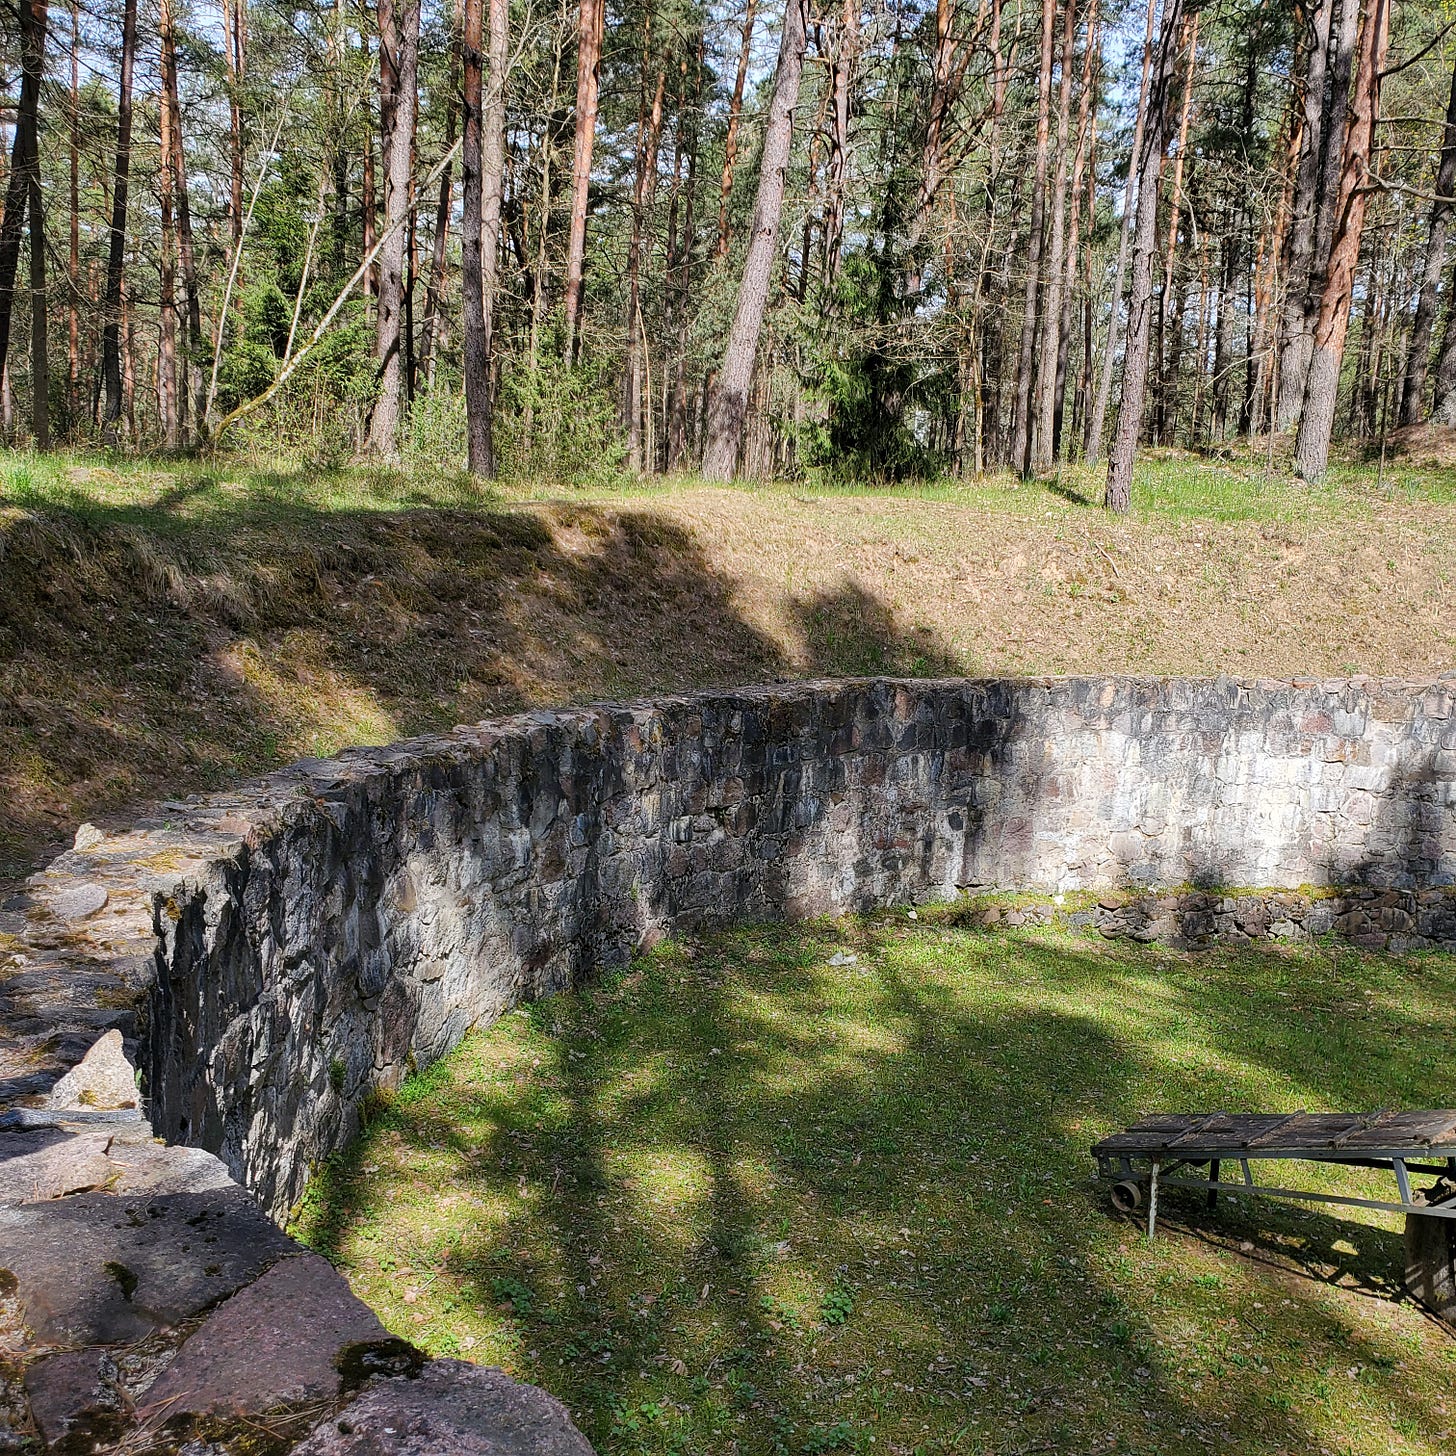 A pit surrounded by a stone wall, about 4 meters high.